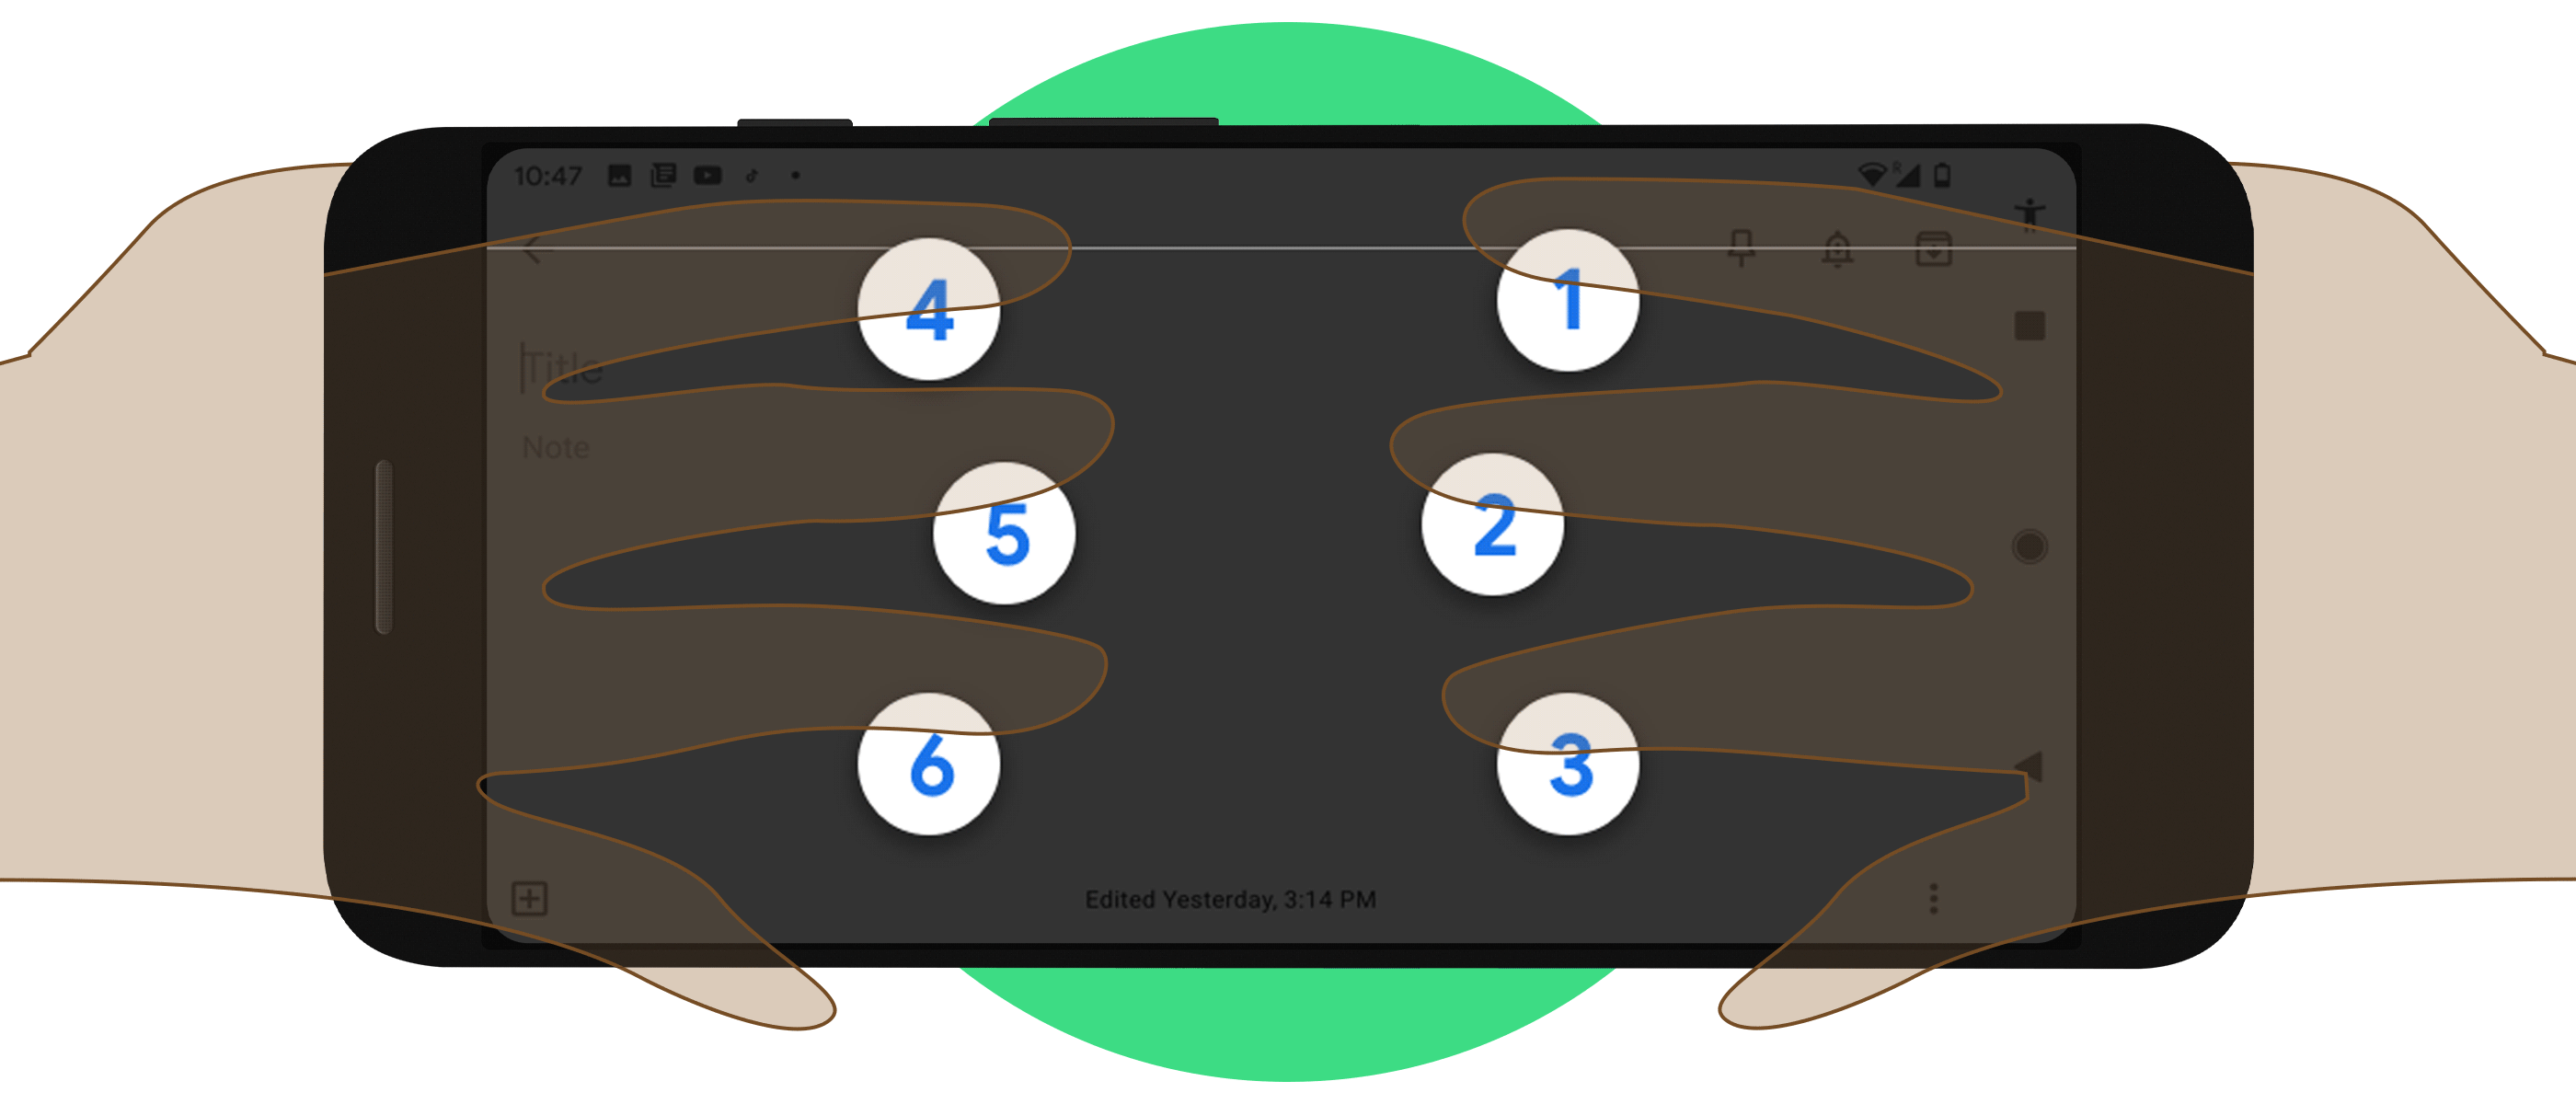 Animation shows fingers typing on six dots representing Braille keys